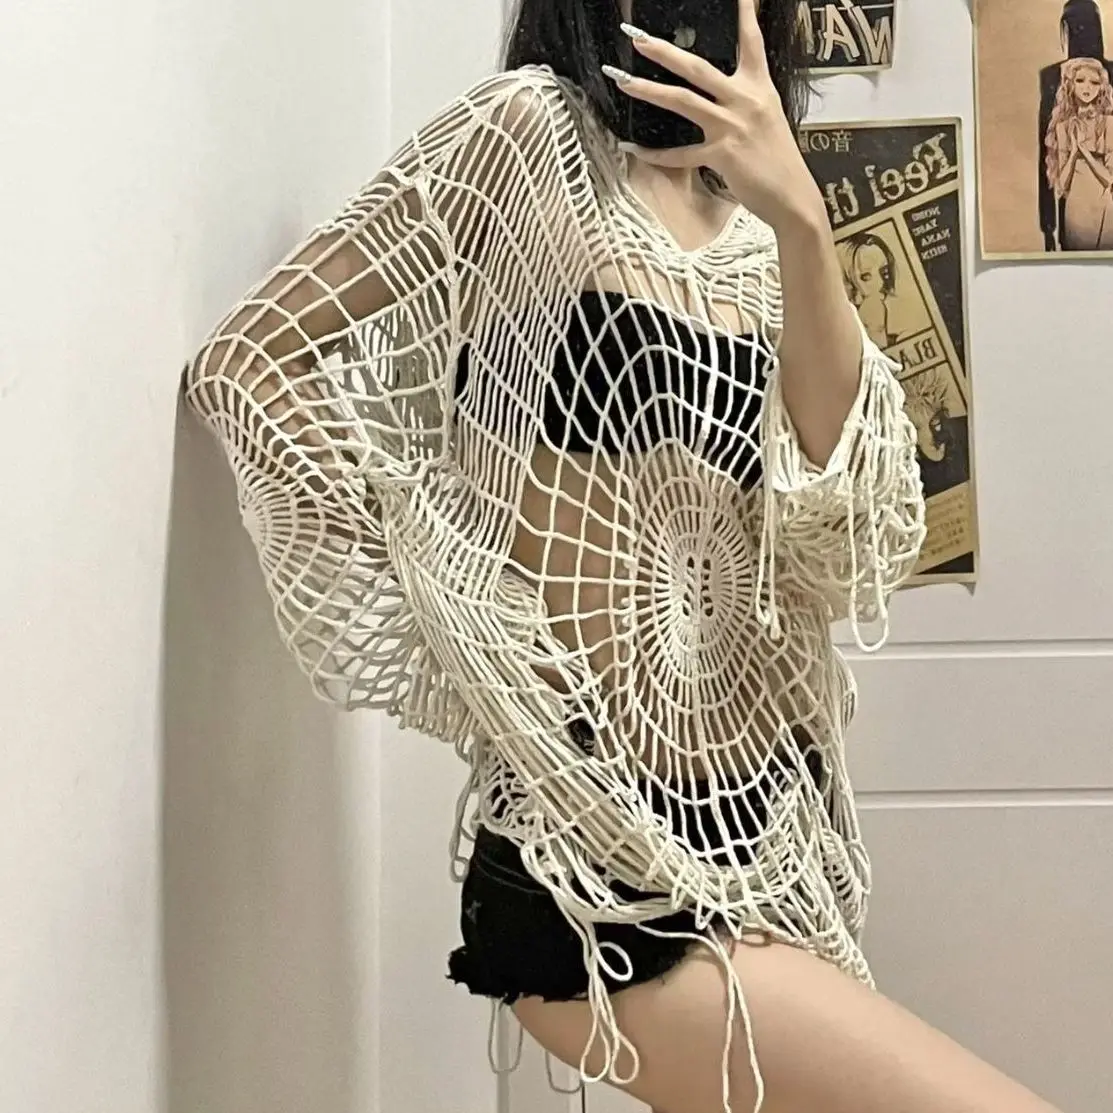 

Hollow Knit Hooded Top Y2k Clothes Spider Web Spice Girl Mesh Pullovers Thin Women Korean Fashion Fishing Net Sweaters Gothic